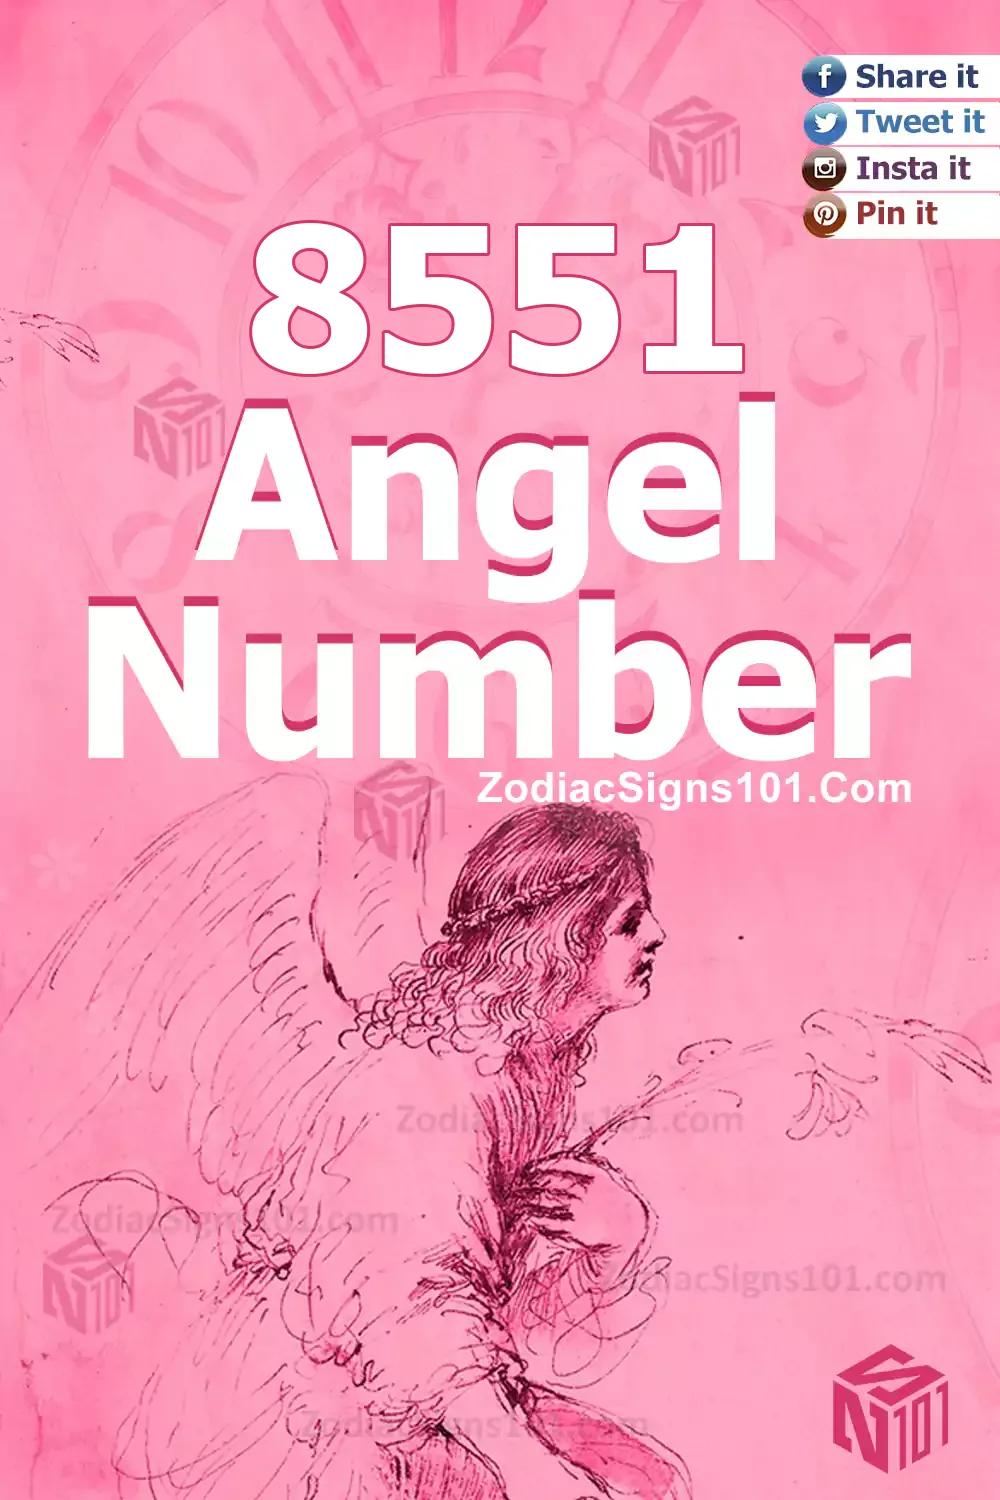 8551 Angel Number Meaning